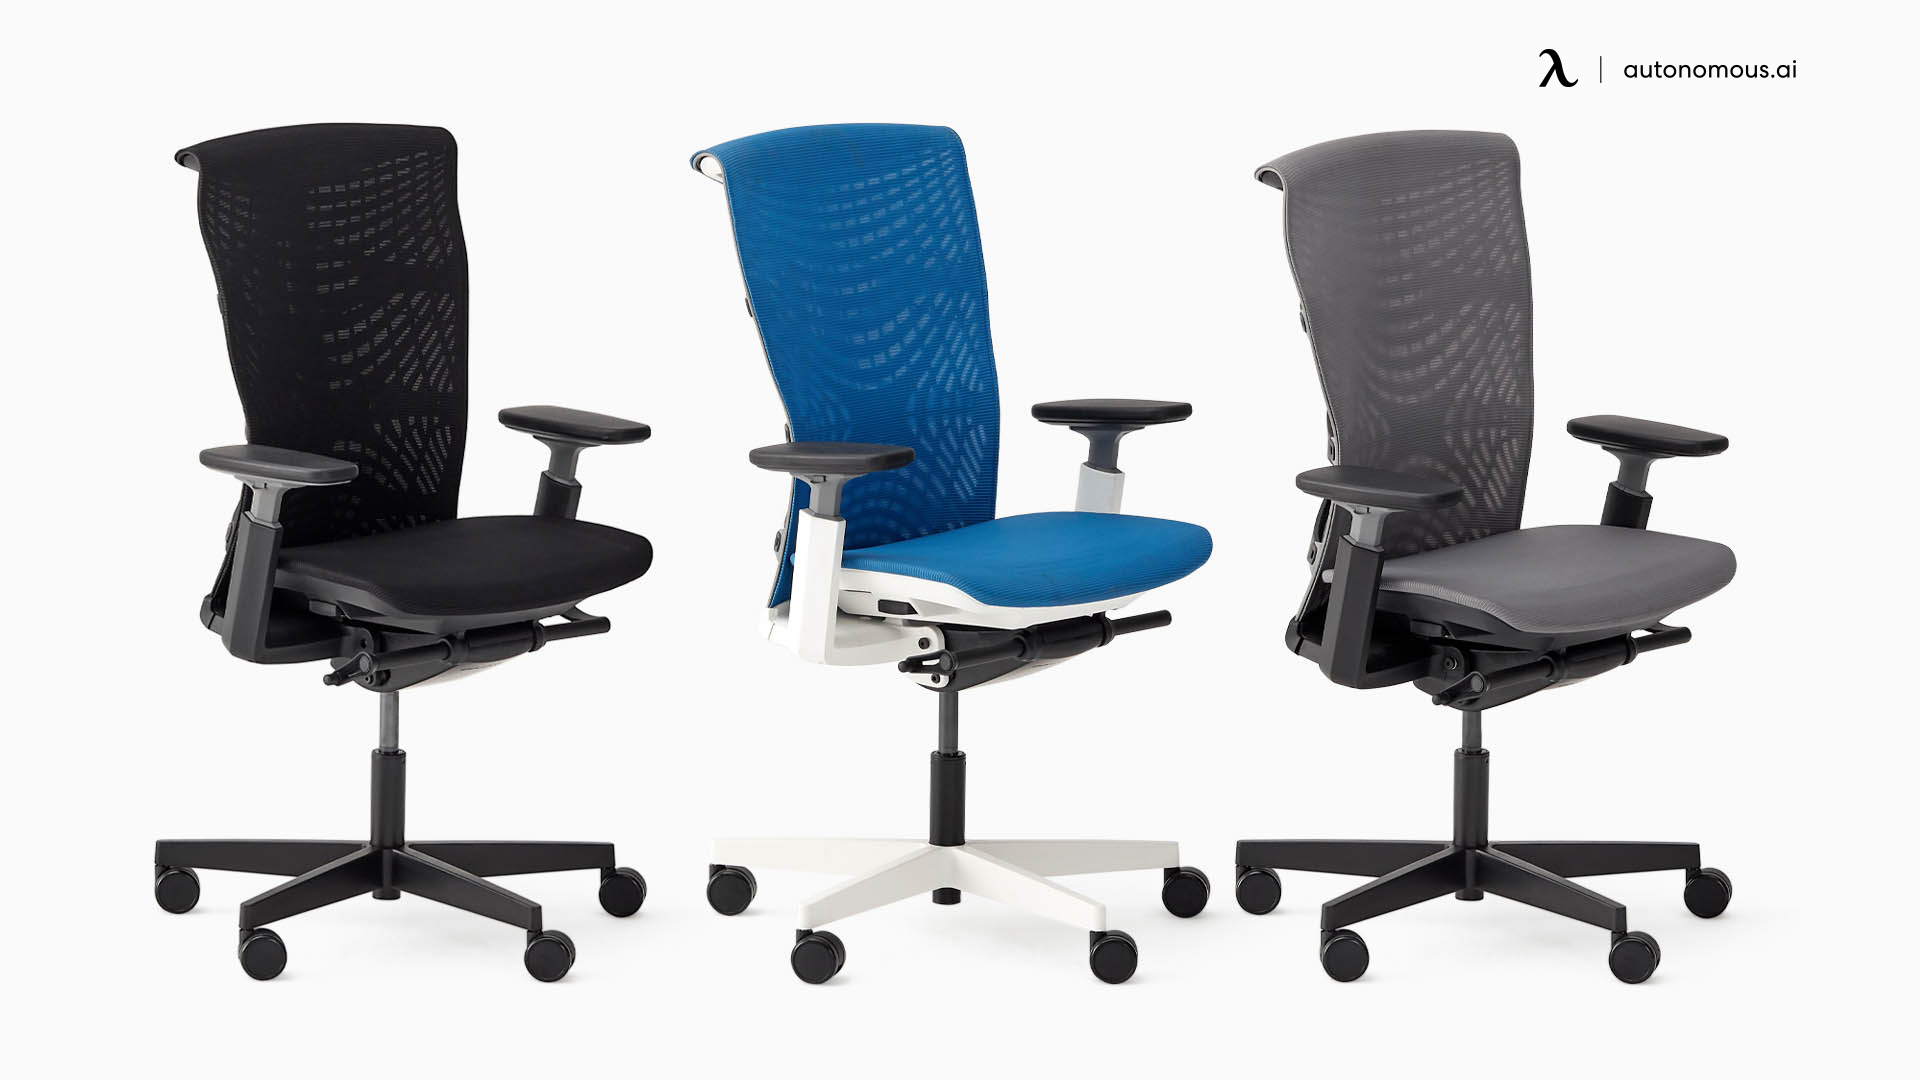 Gas lift SGS tested Black upholstered seat continuously height-adjustable ergonomically designed TRESKO Office Chair Swivel Desk with nylon casters 7 colours available 